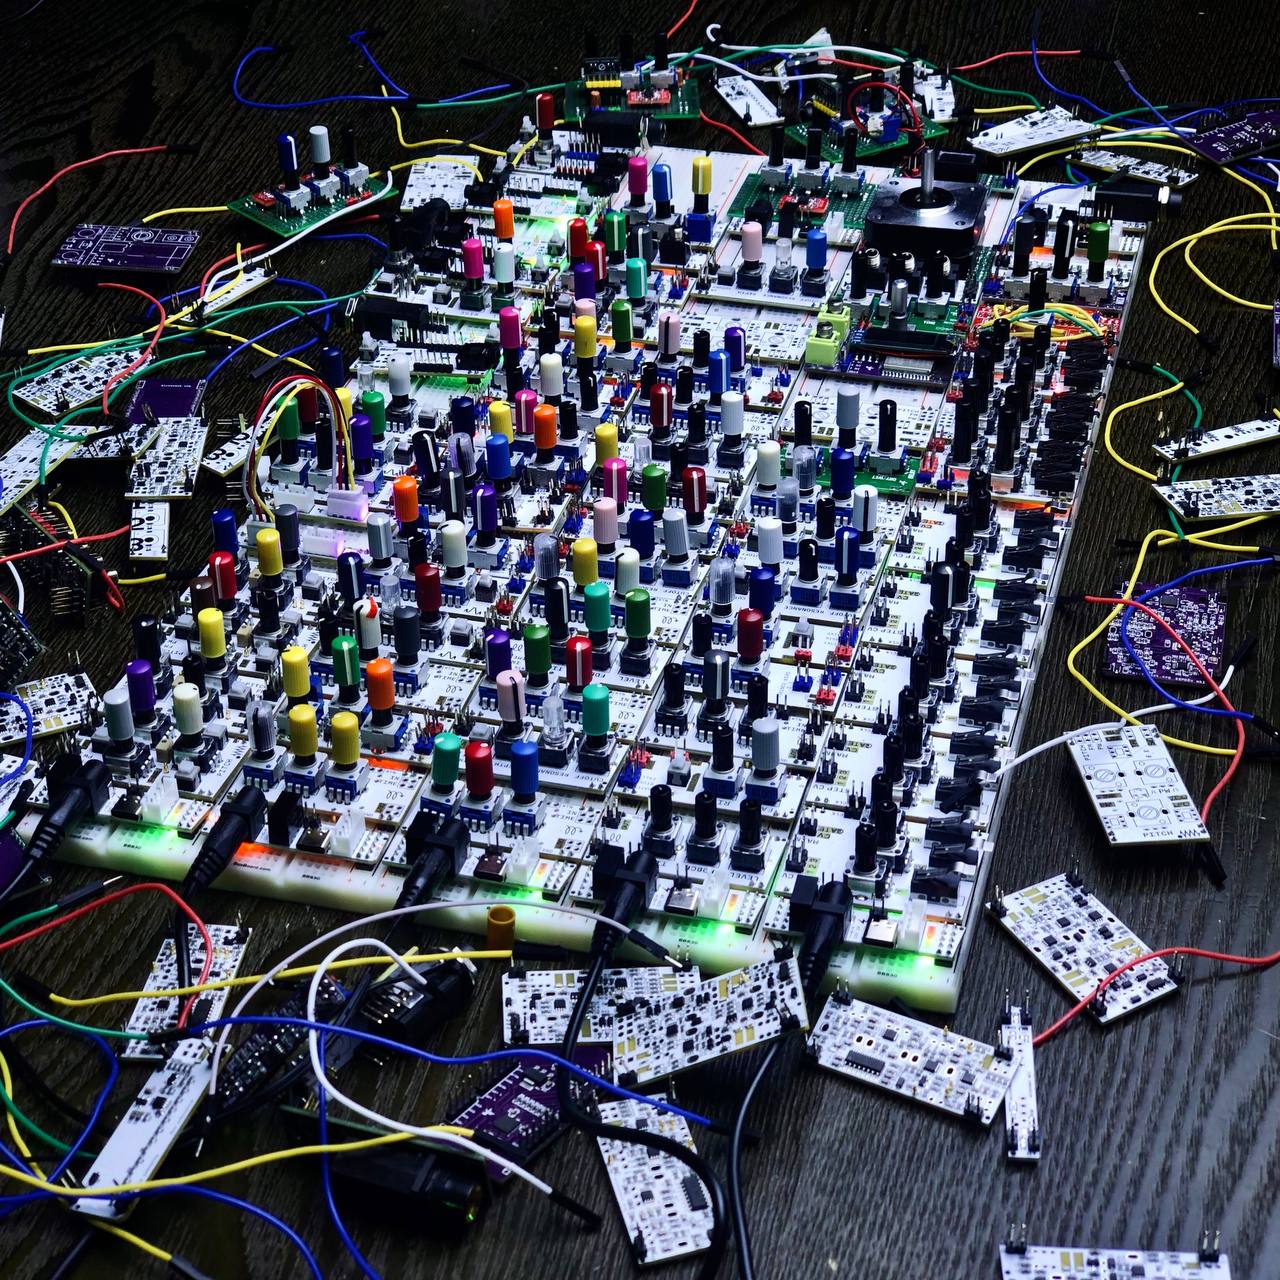 MICRORACK - The most accessible modular synthesizer